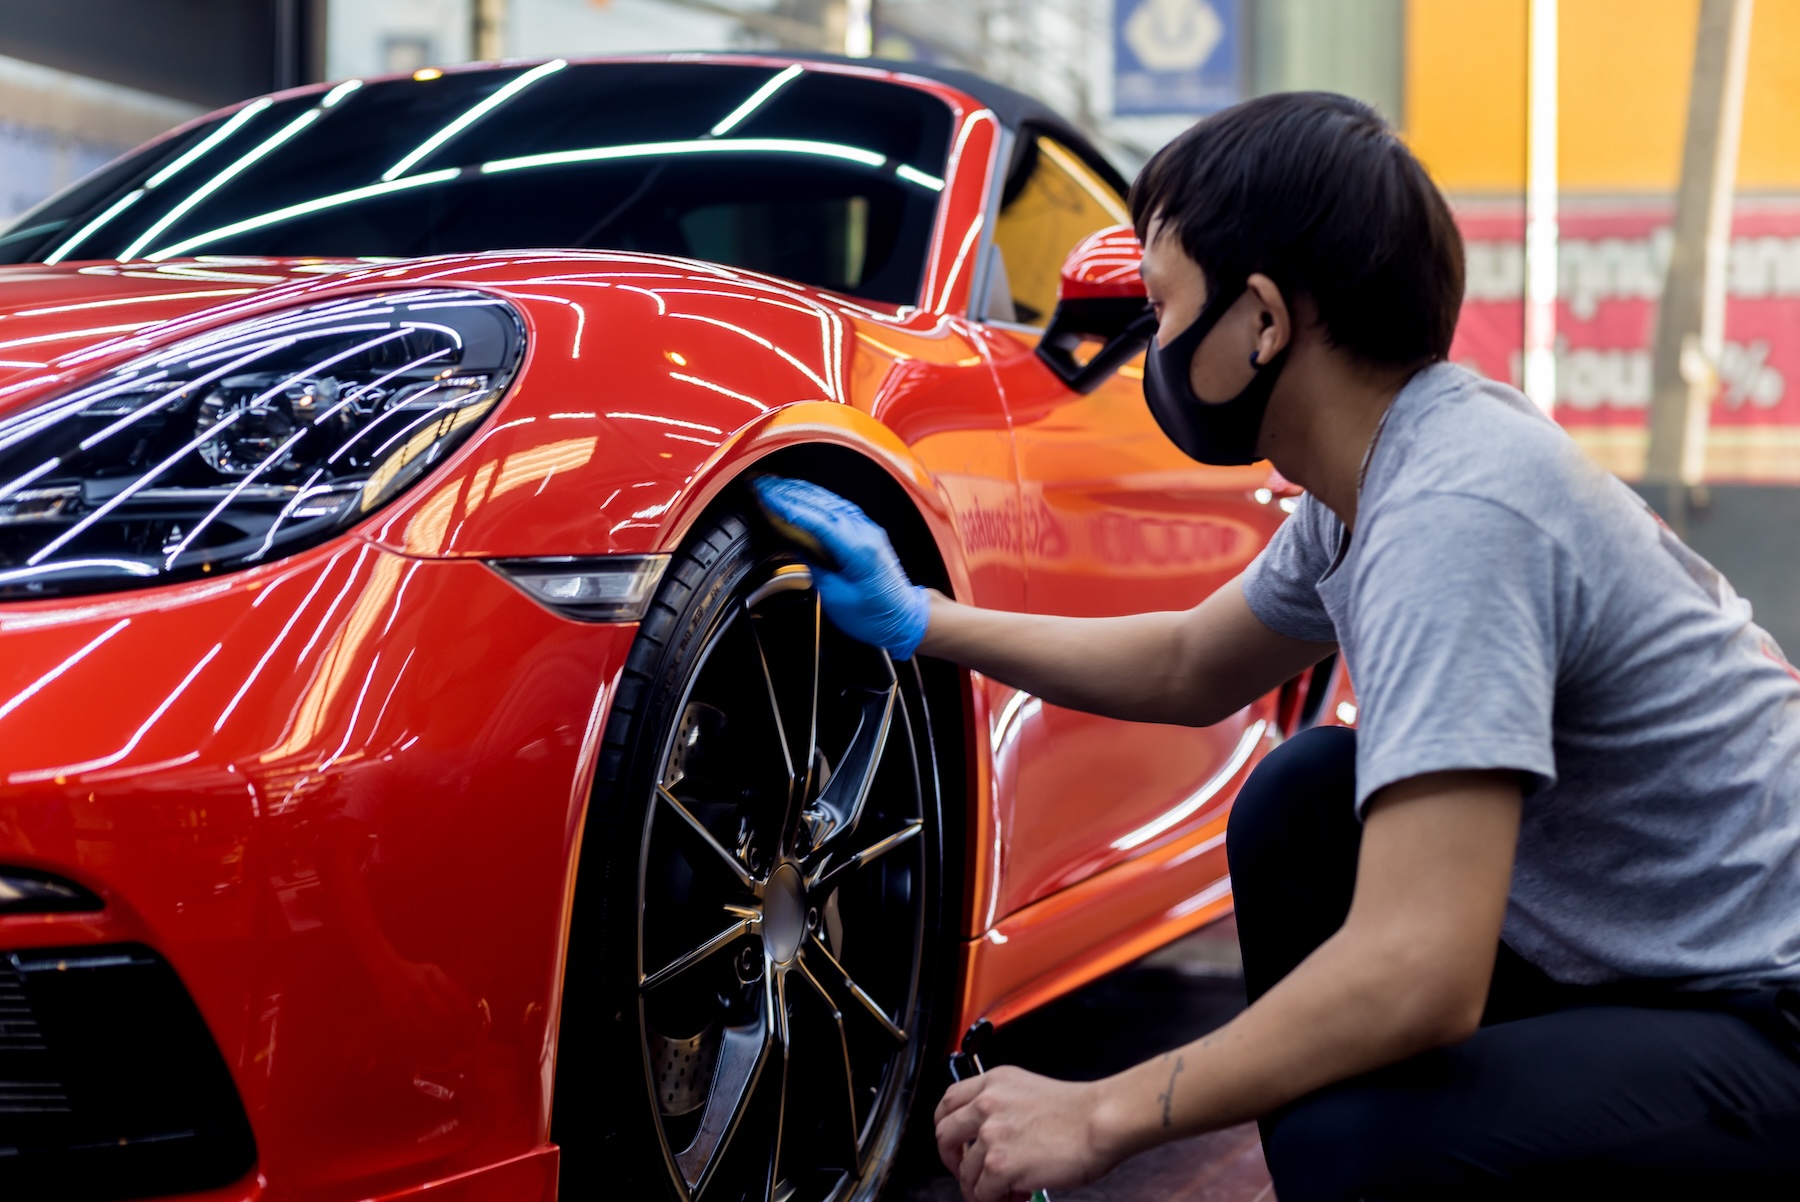 Trend-spotting in Auto Detailing: The Rising Popularity of Ceramic Coatings